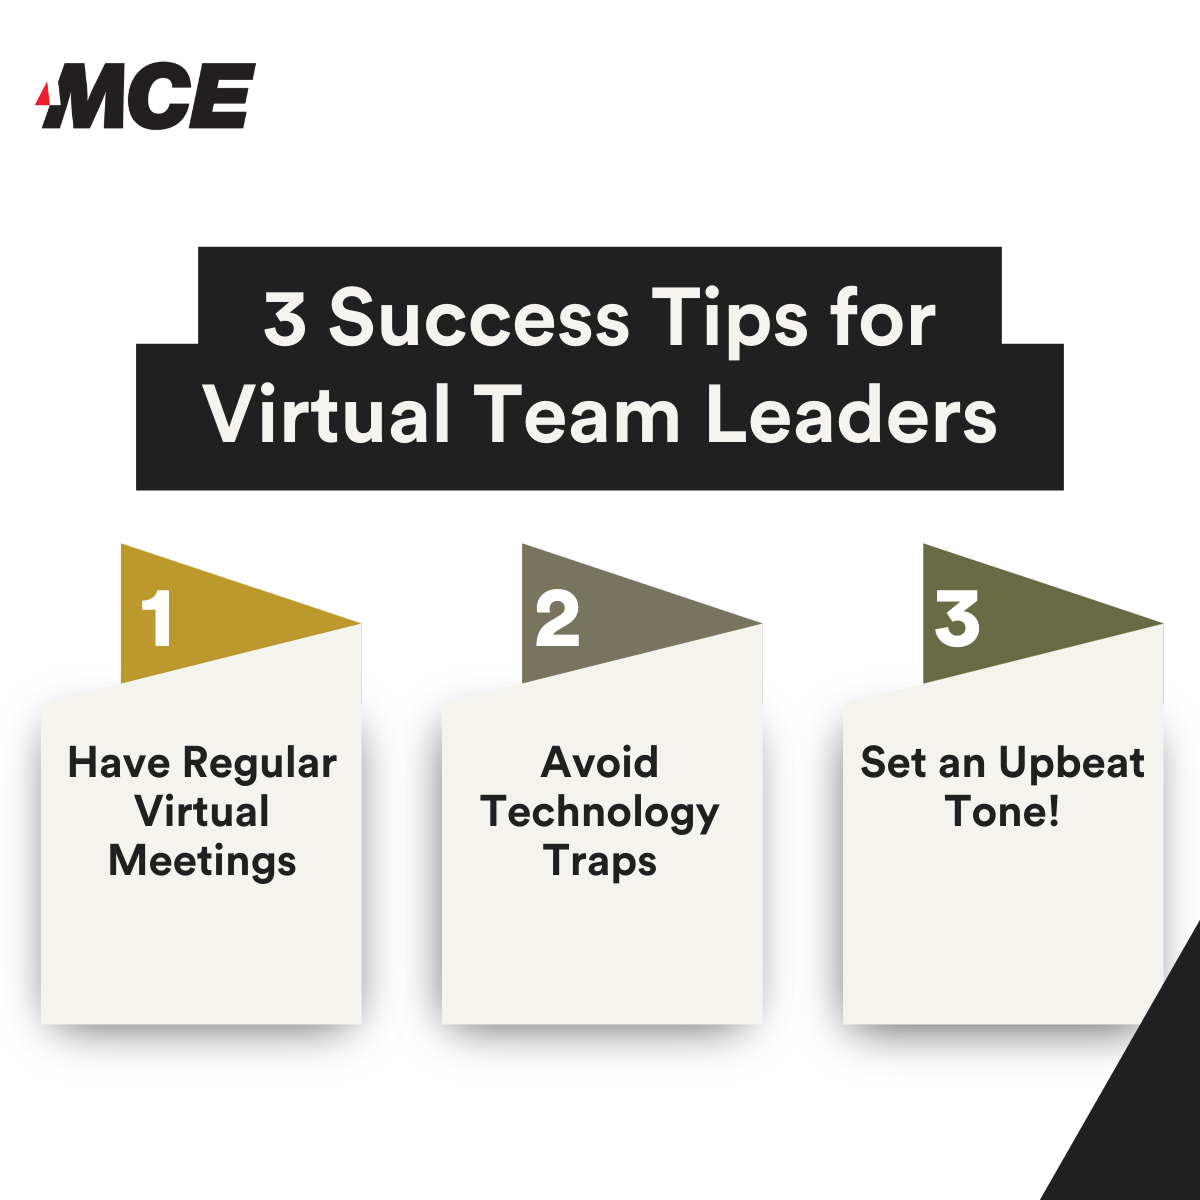 3 Success Tips for Virtual Team Leaders